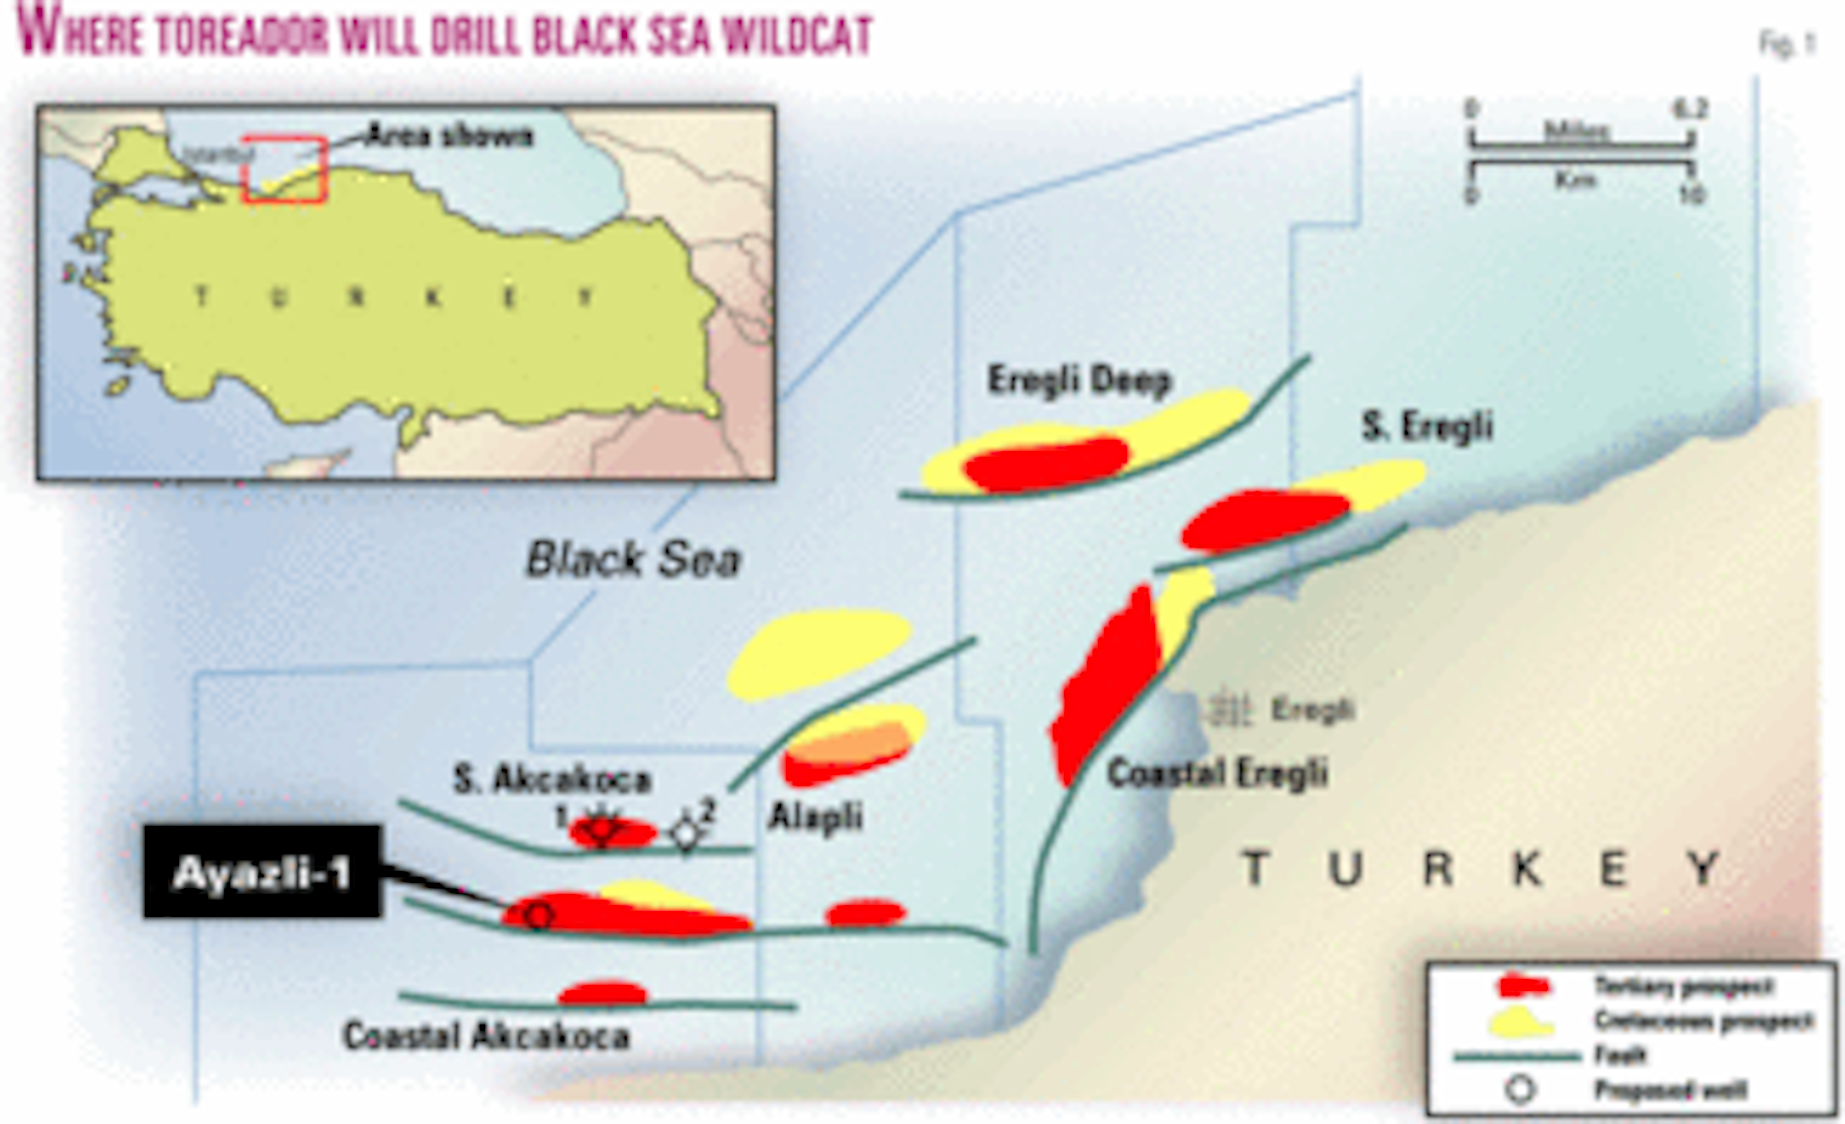 Tertiary gas exploration well to be first in Turkish Black Sea waters